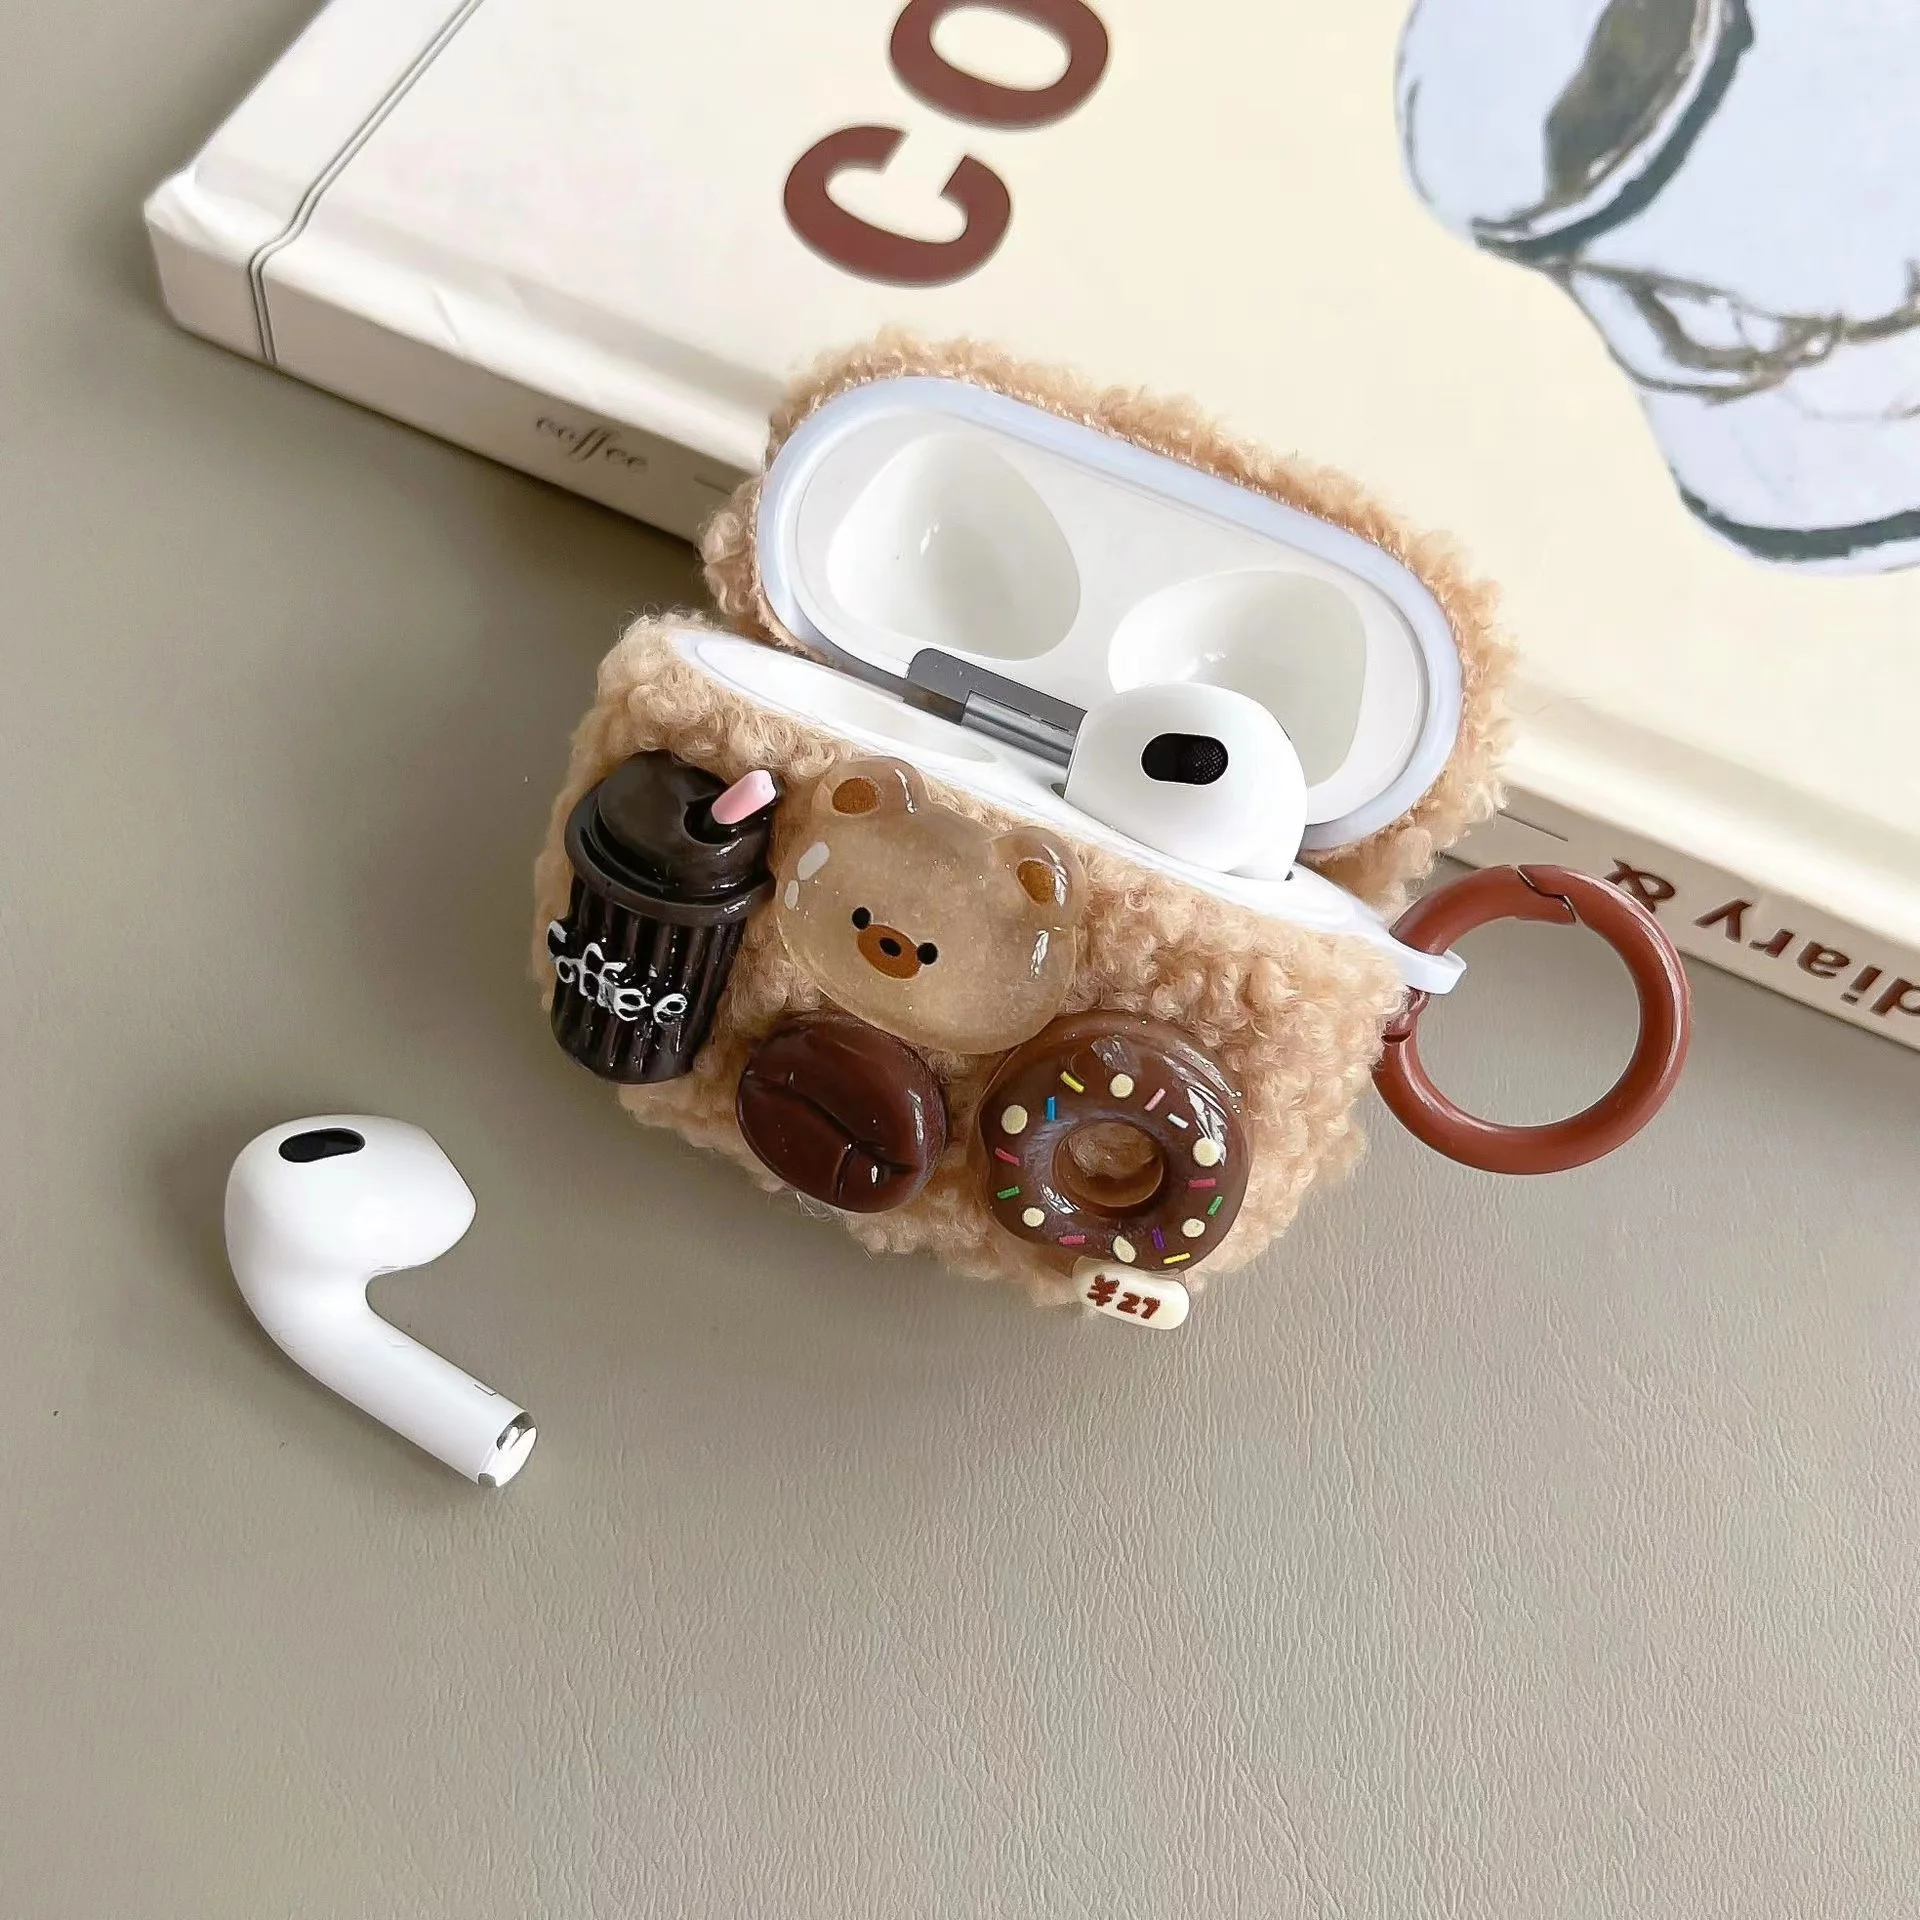 

Handmade Plush Coffee Piglet Airpods Case Bluetooth Earphone Protector Apple Airpods Pro 1 2 3 Charging Bin Silicone Protective